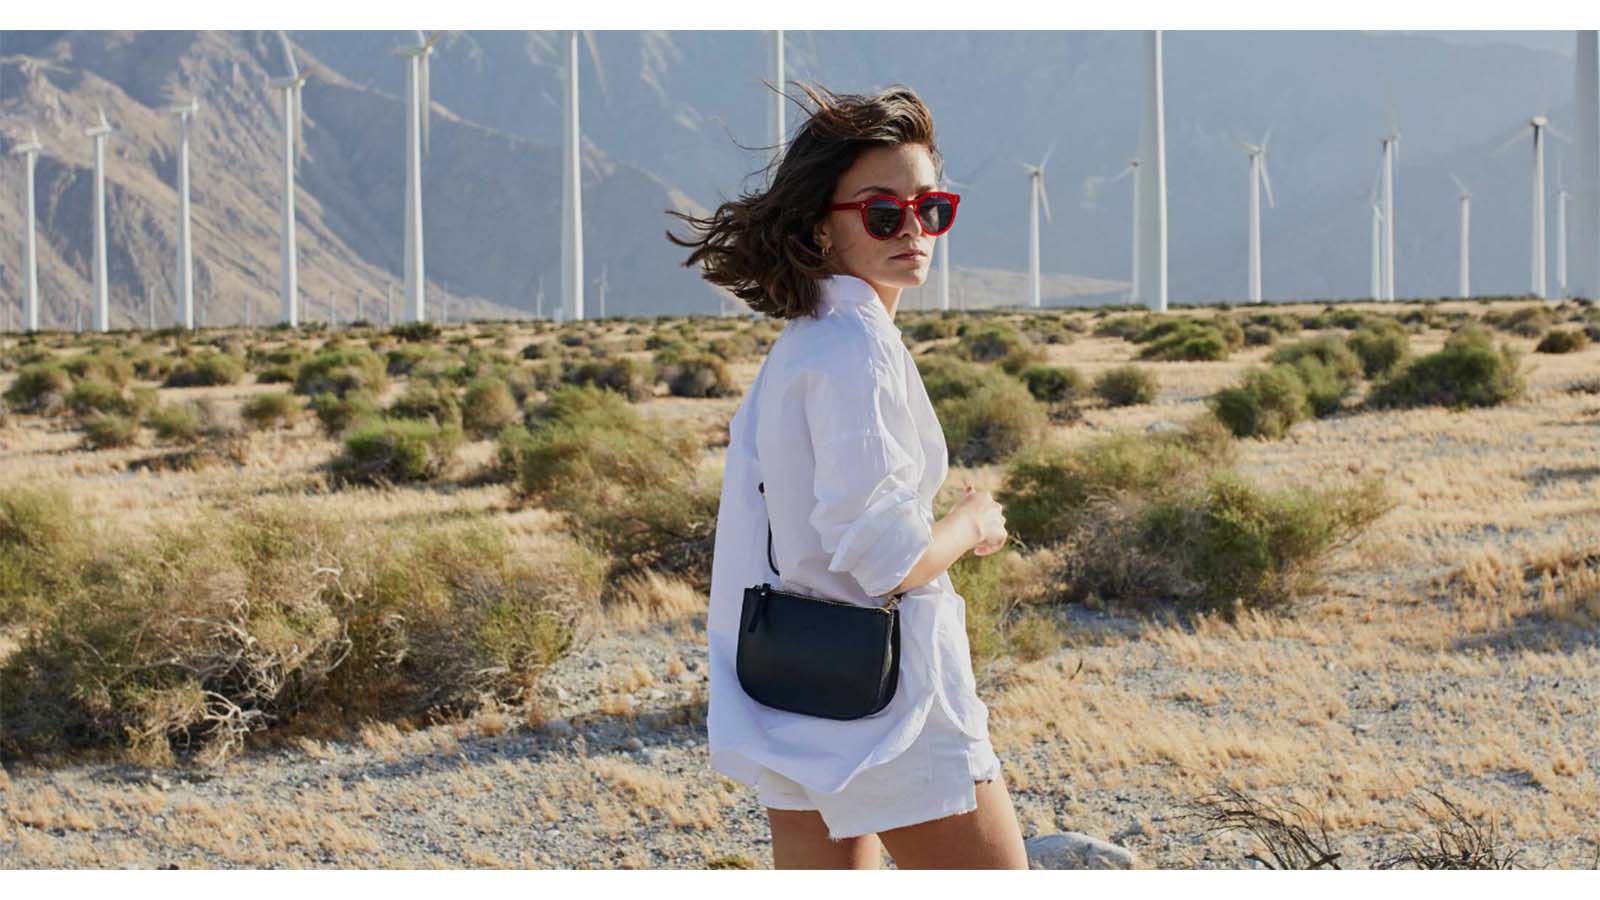 Discover the Waverly, a stylish travel crossbody bag